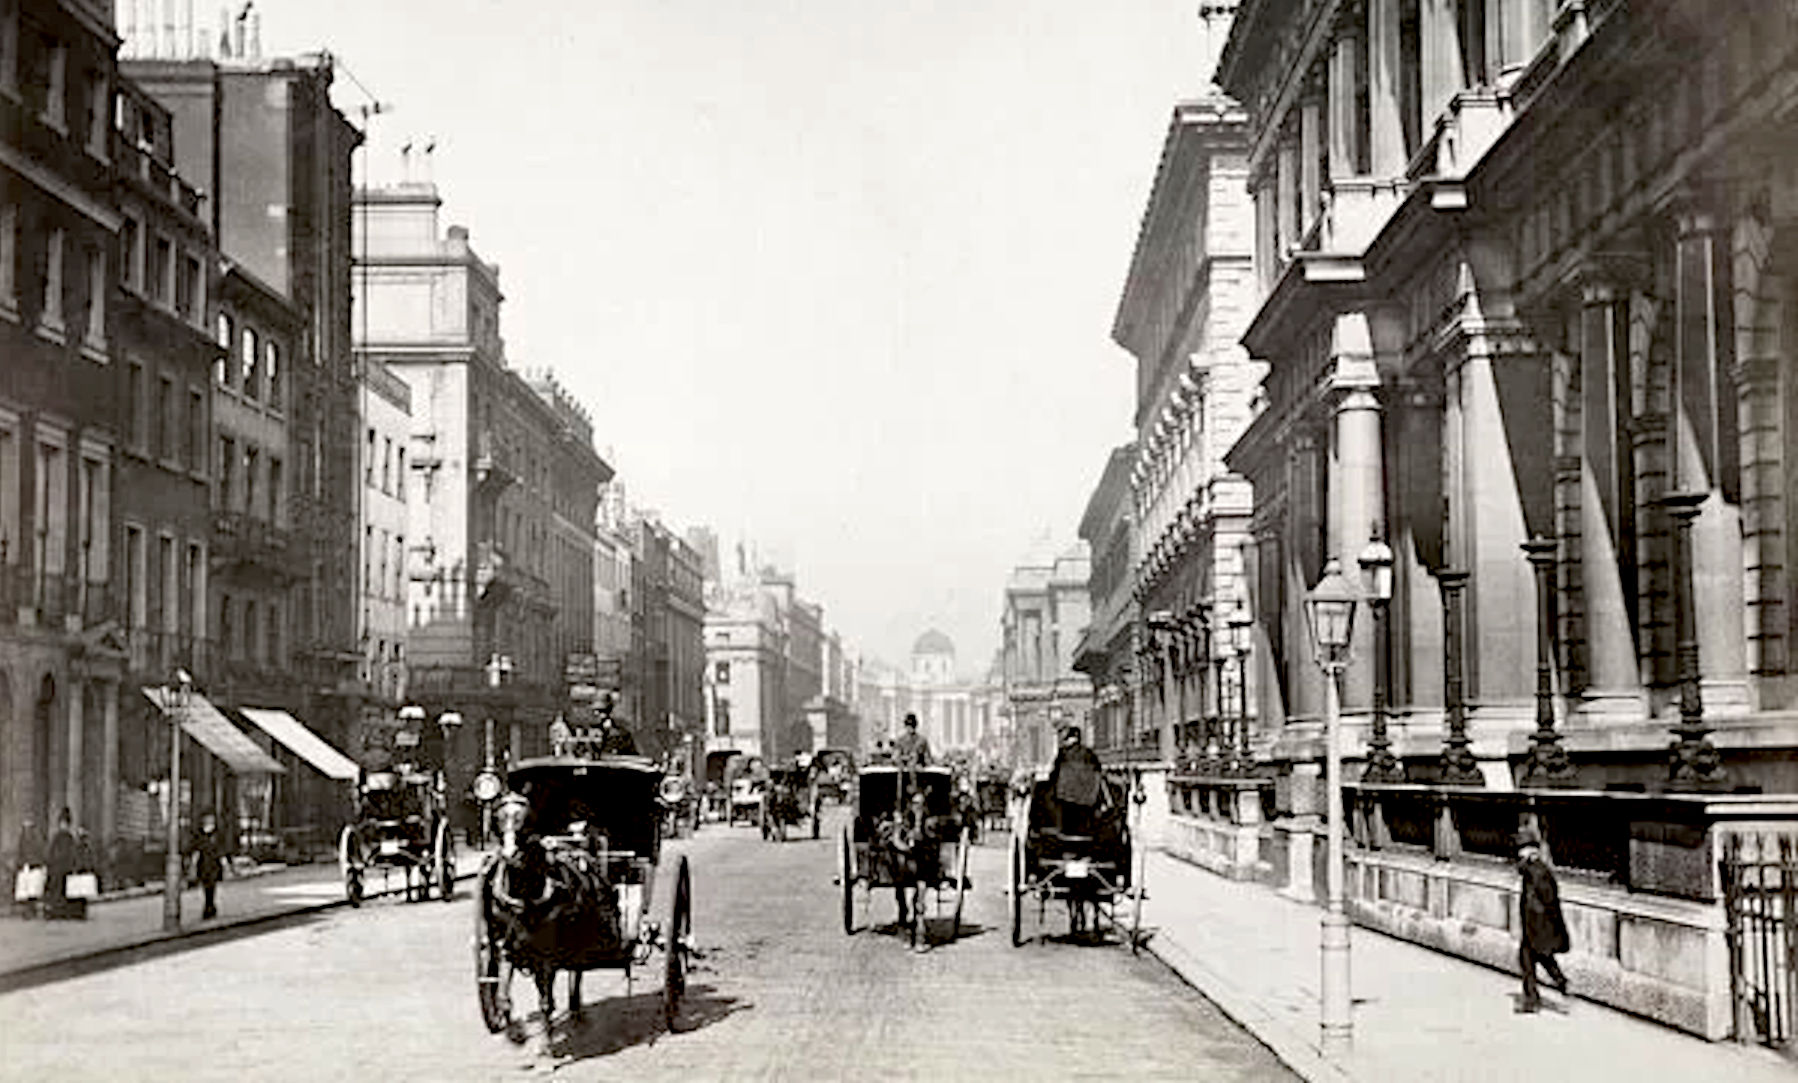 Pall Mall, London. Location of geographical and exploration clubs and societies.